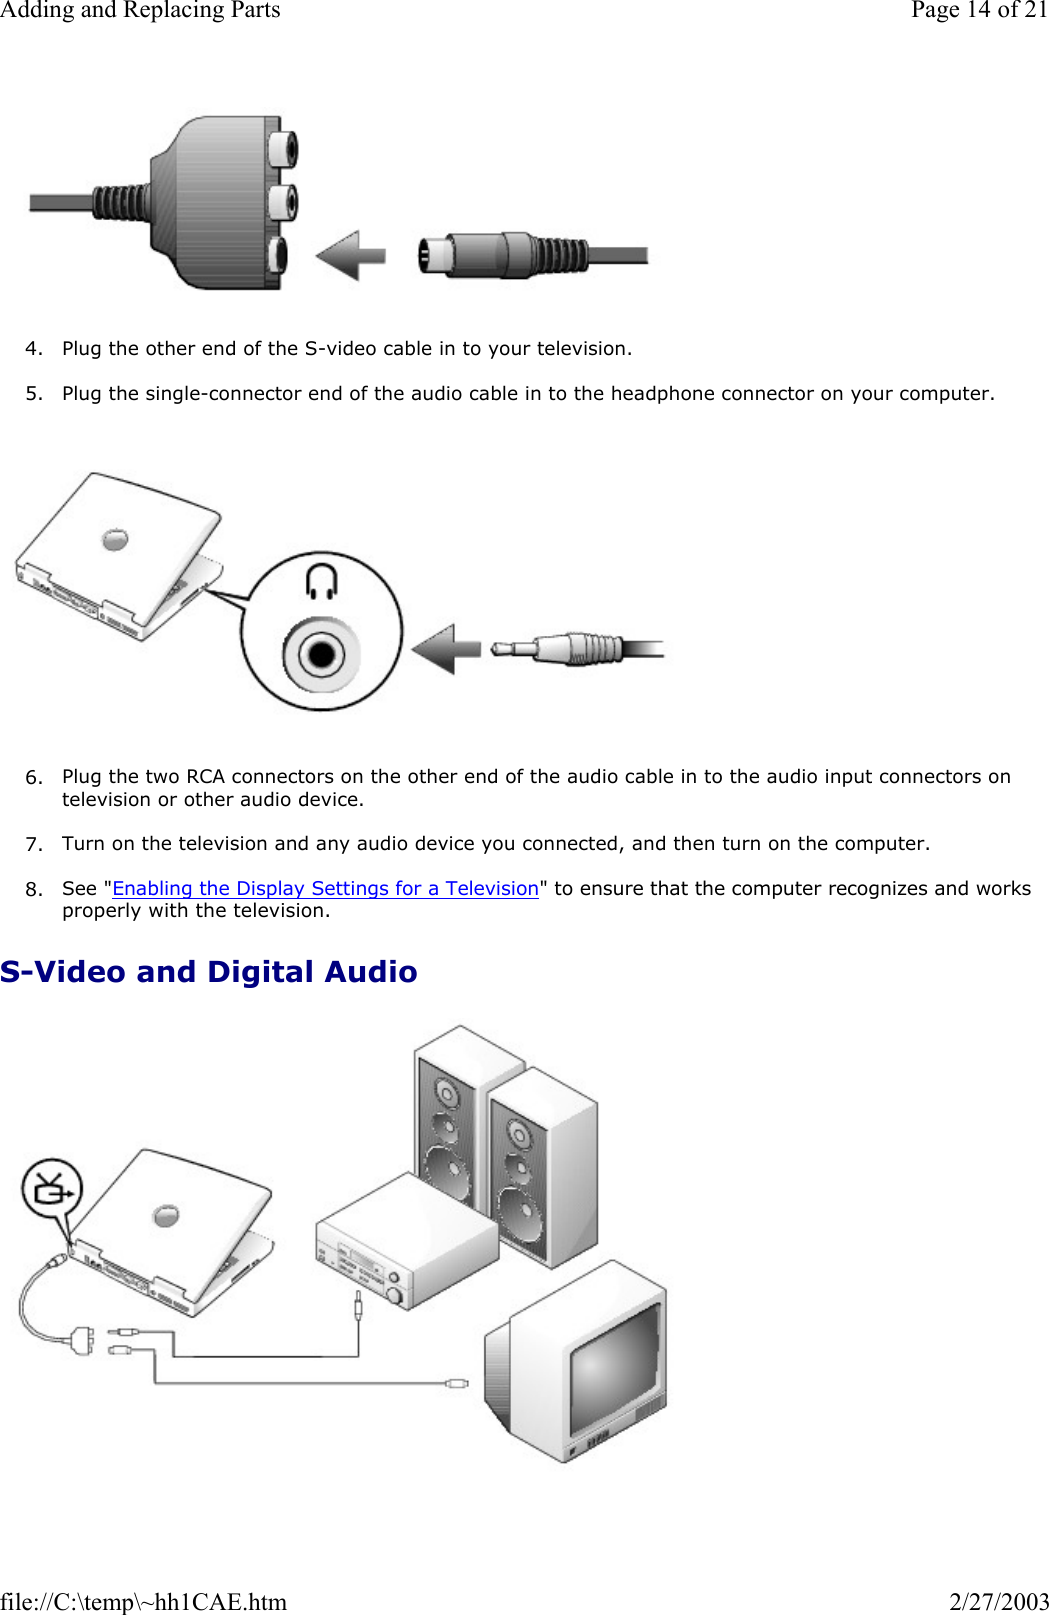   4. Plug the other end of the S-video cable in to your television.  5. Plug the single-connector end of the audio cable in to the headphone connector on your computer.    6. Plug the two RCA connectors on the other end of the audio cable in to the audio input connectors on television or other audio device.  7. Turn on the television and any audio device you connected, and then turn on the computer.  8. See &quot;Enabling the Display Settings for a Television&quot; to ensure that the computer recognizes and works properly with the television.  S-Video and Digital Audio   Page 14 of 21Adding and Replacing Parts2/27/2003file://C:\temp\~hh1CAE.htm